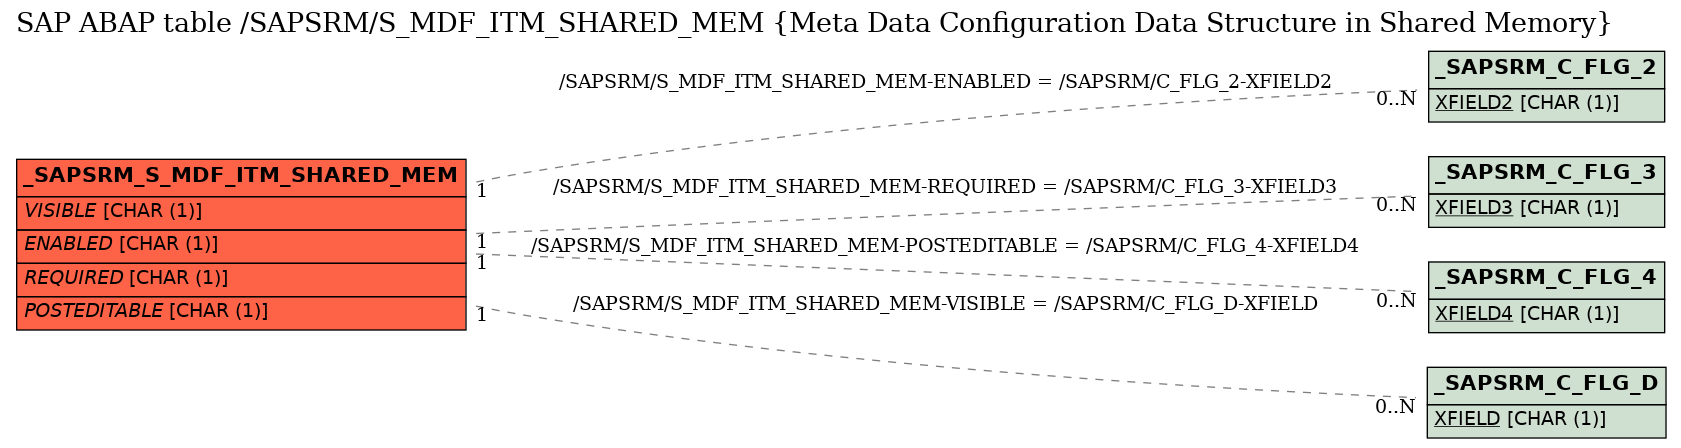 E-R Diagram for table /SAPSRM/S_MDF_ITM_SHARED_MEM (Meta Data Configuration Data Structure in Shared Memory)